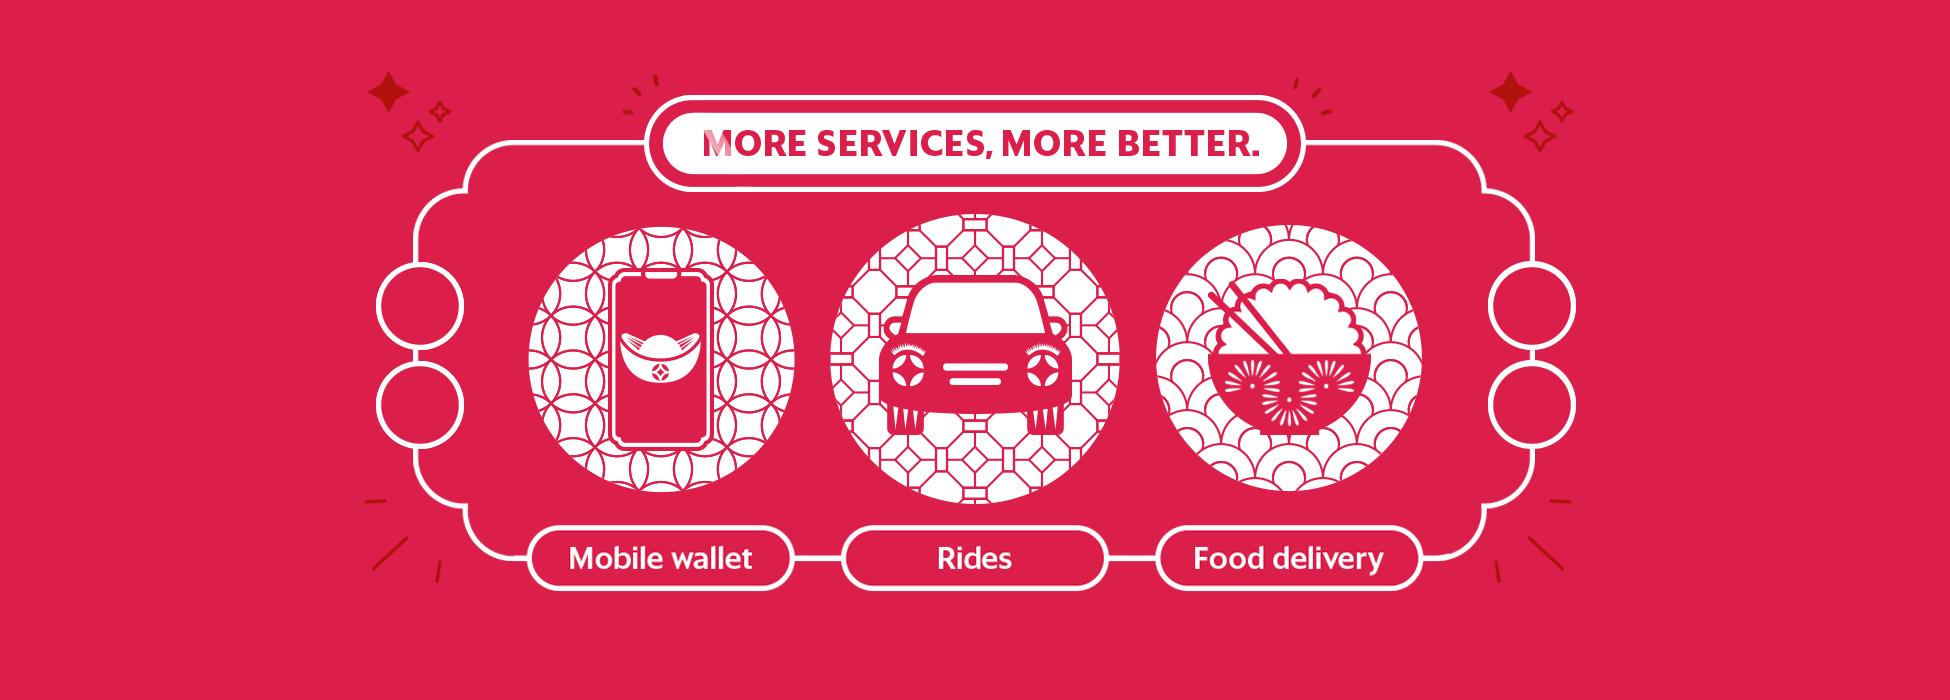 MORE SERVICES, MORE BETTER. Mobile wallet .  Rides . Fodd delivery